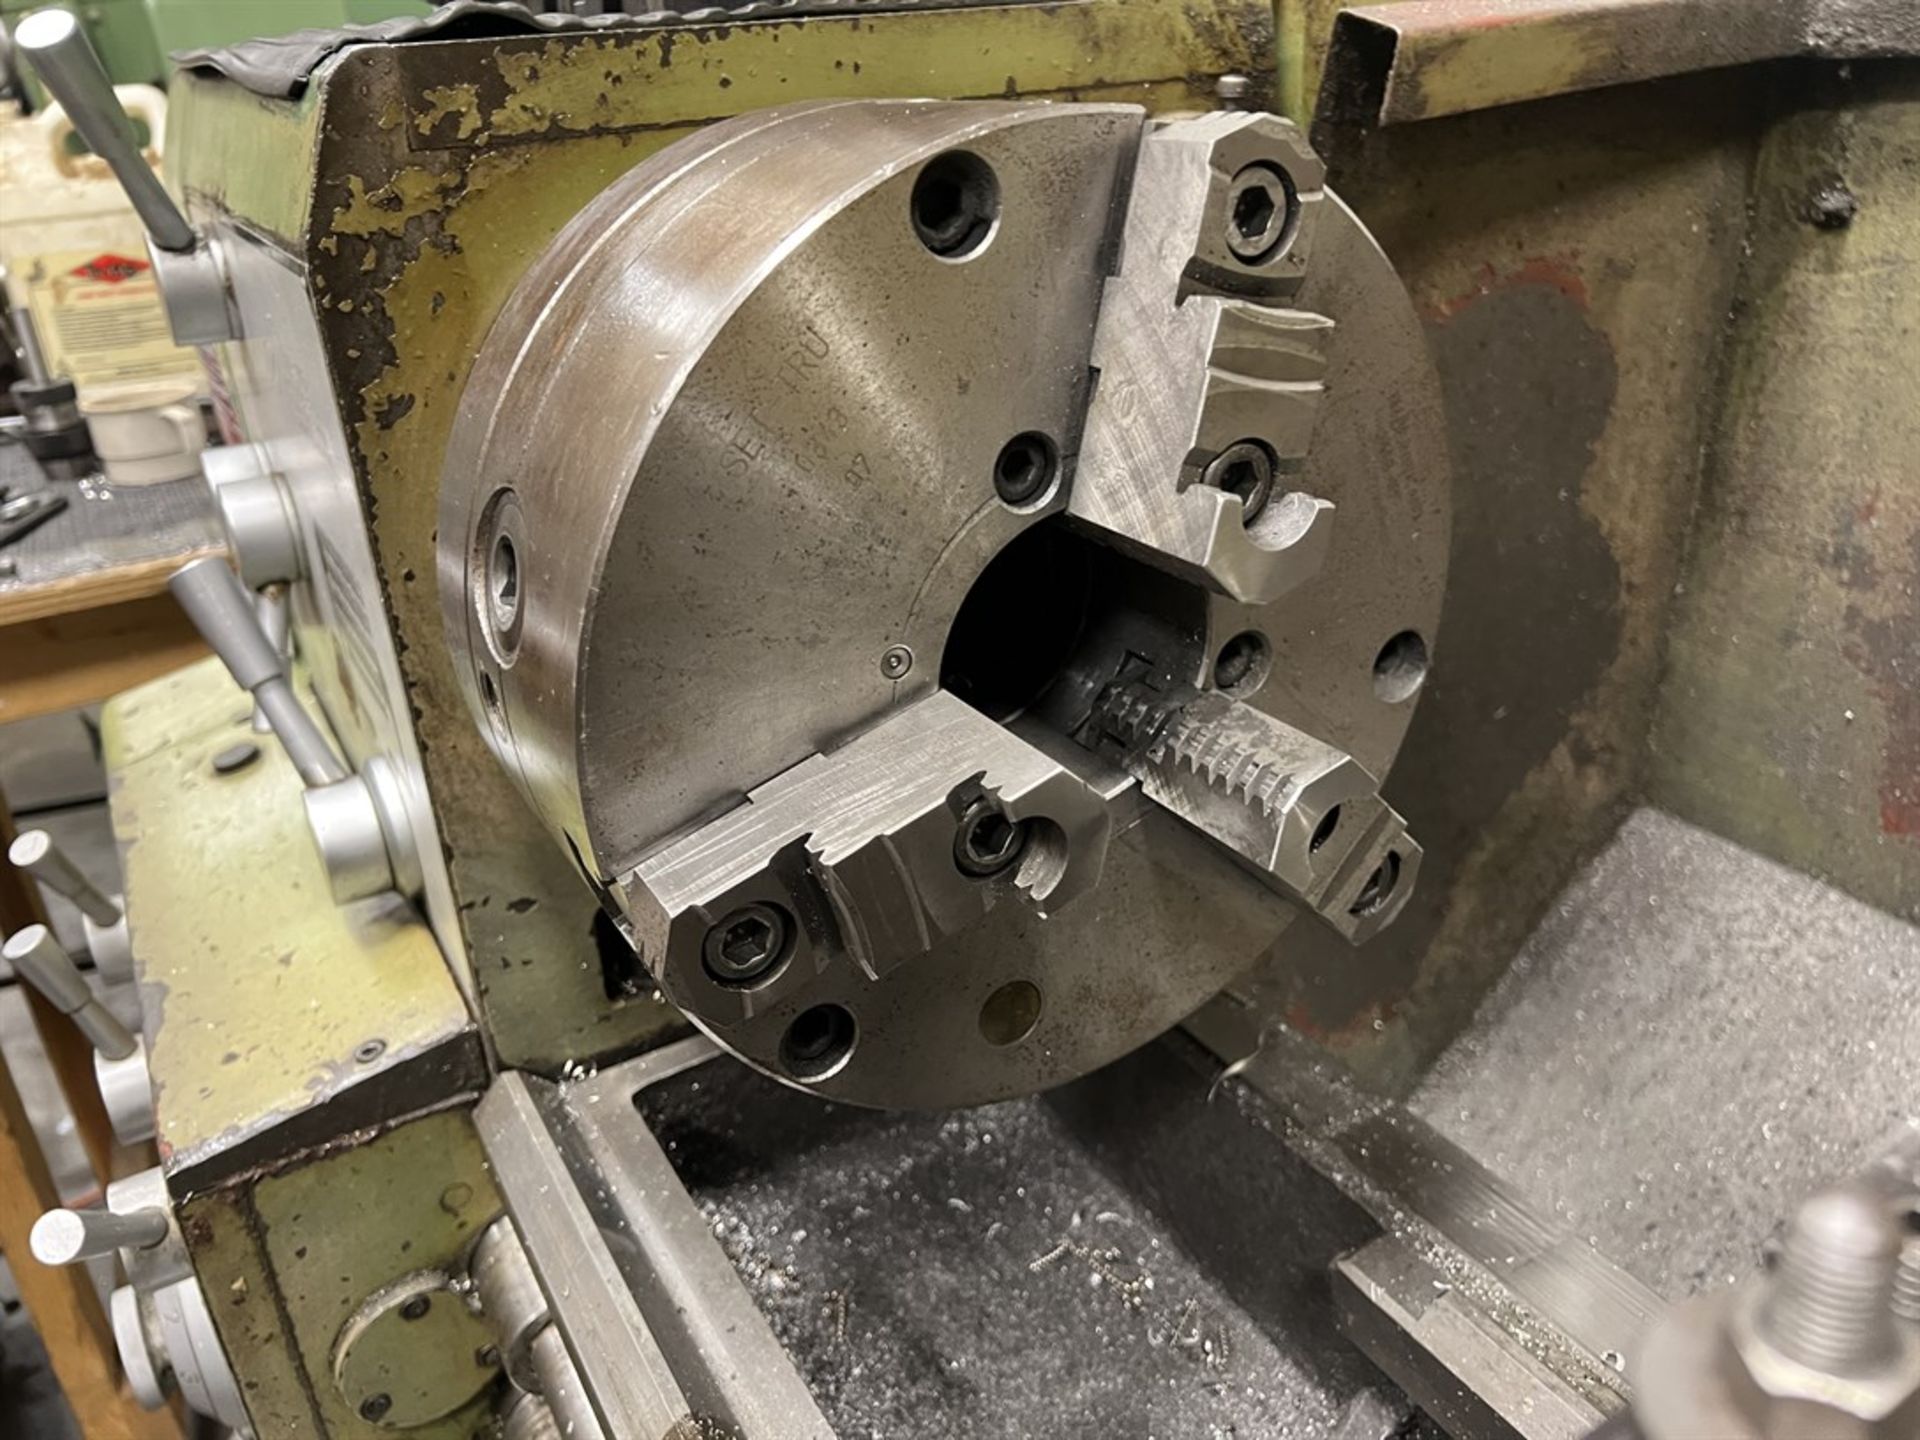 VICTOR 1640 B Lathe, s/n 29122500, 16" Swing, 40" Between Centers, 9.75" Dia 3-Jaw Chuck, Dorian - Image 3 of 10